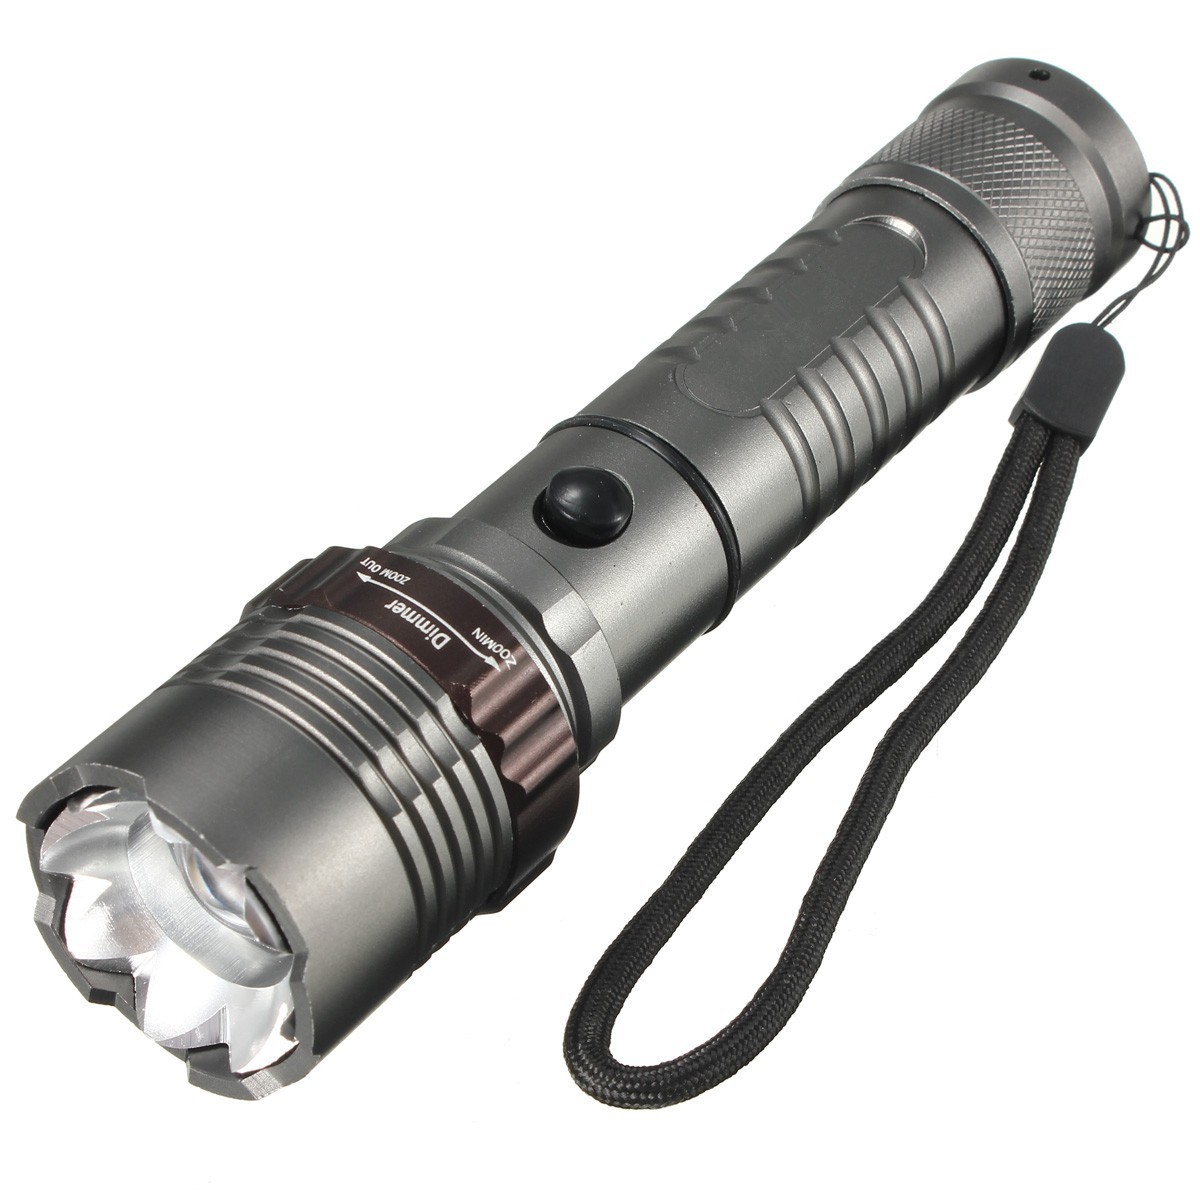 2600LM-T6-LED-Flashlight-Zoomable-5Modes-18650-Torch-Super-Bright-Torch-Lamp-For-Camping-Hiking-Cycl-1934827-8